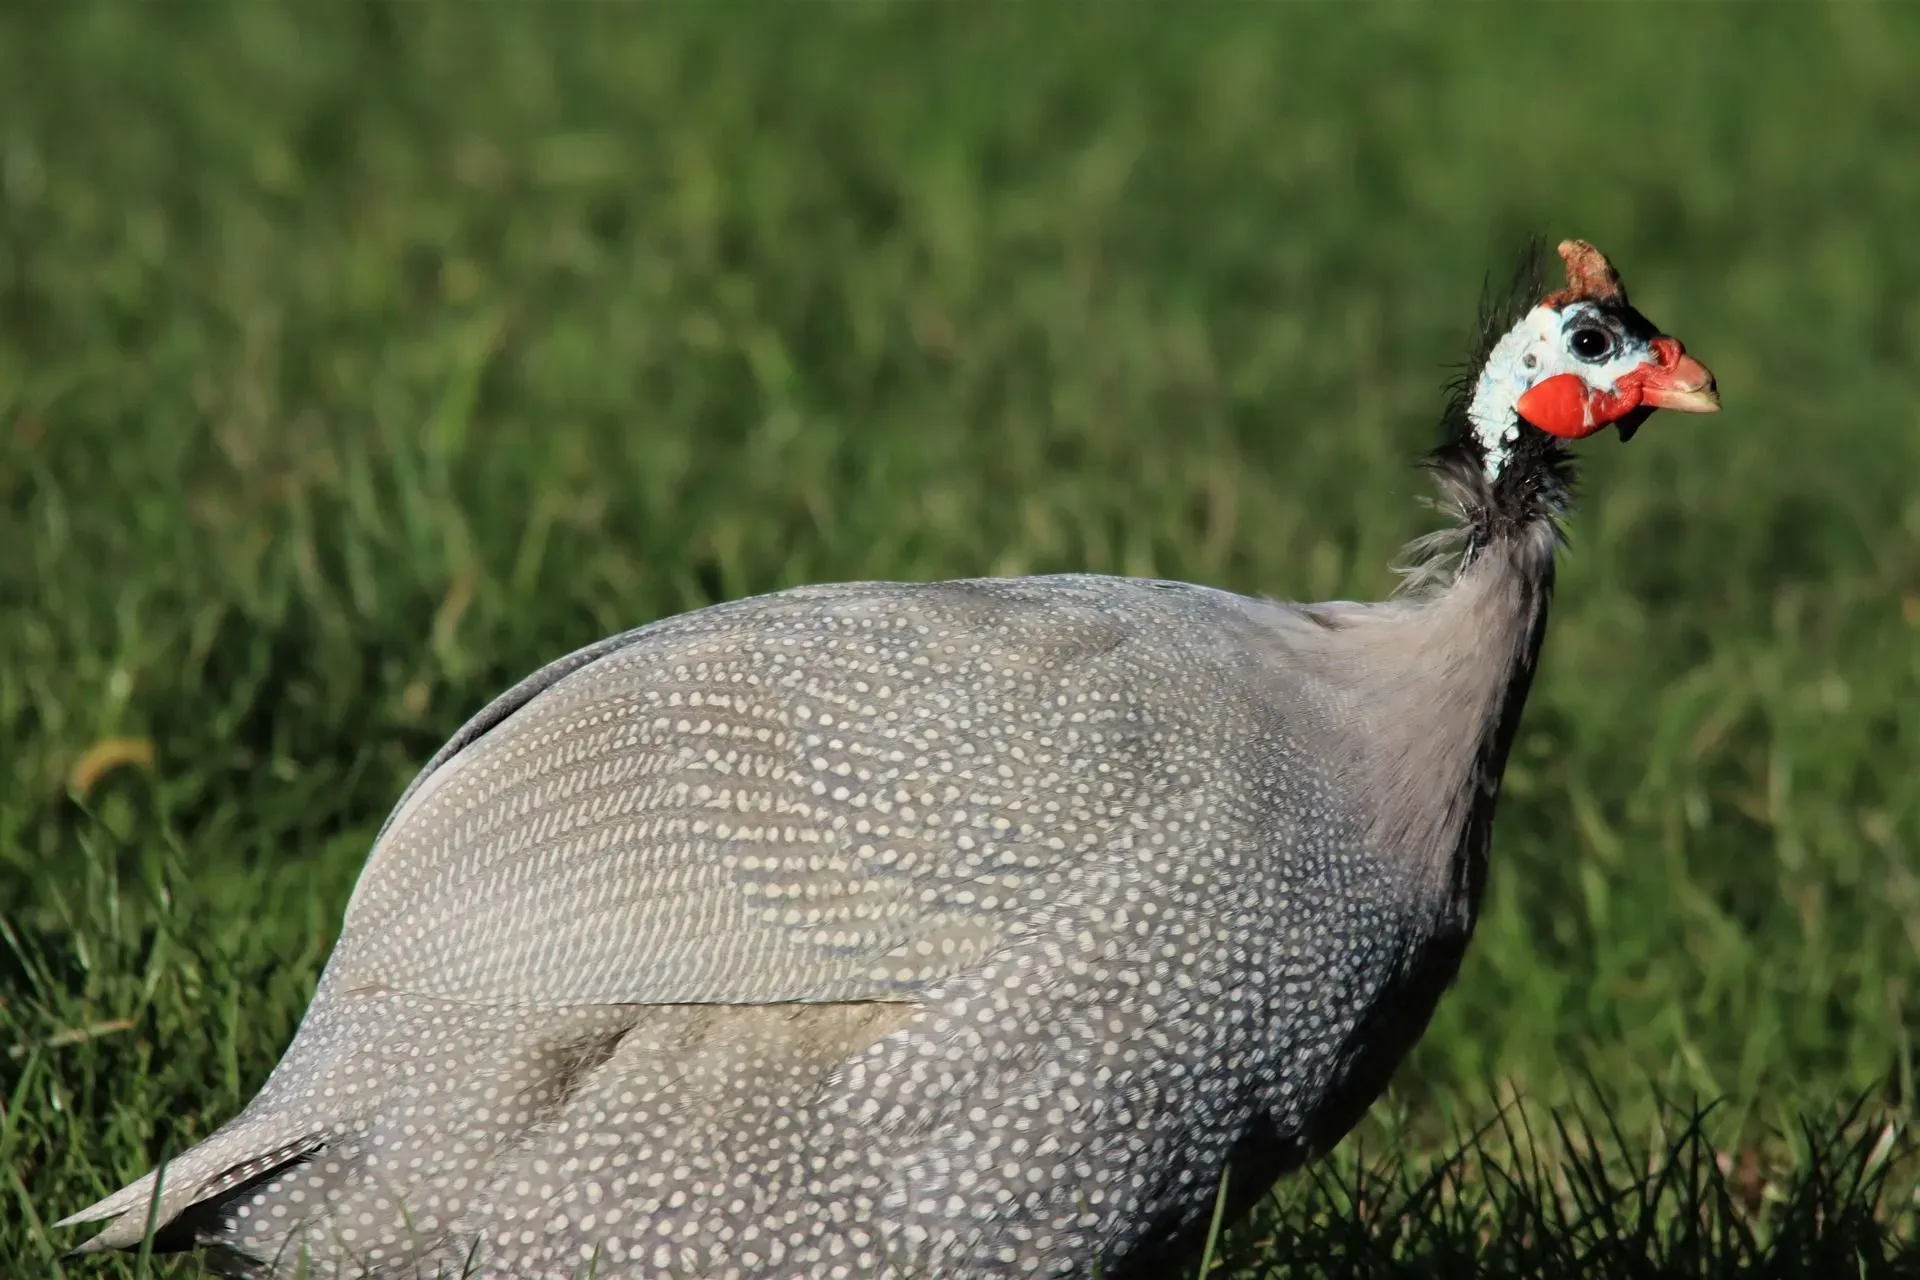 Poultry lovers like to identify guinea fowl sounds when near a coop.